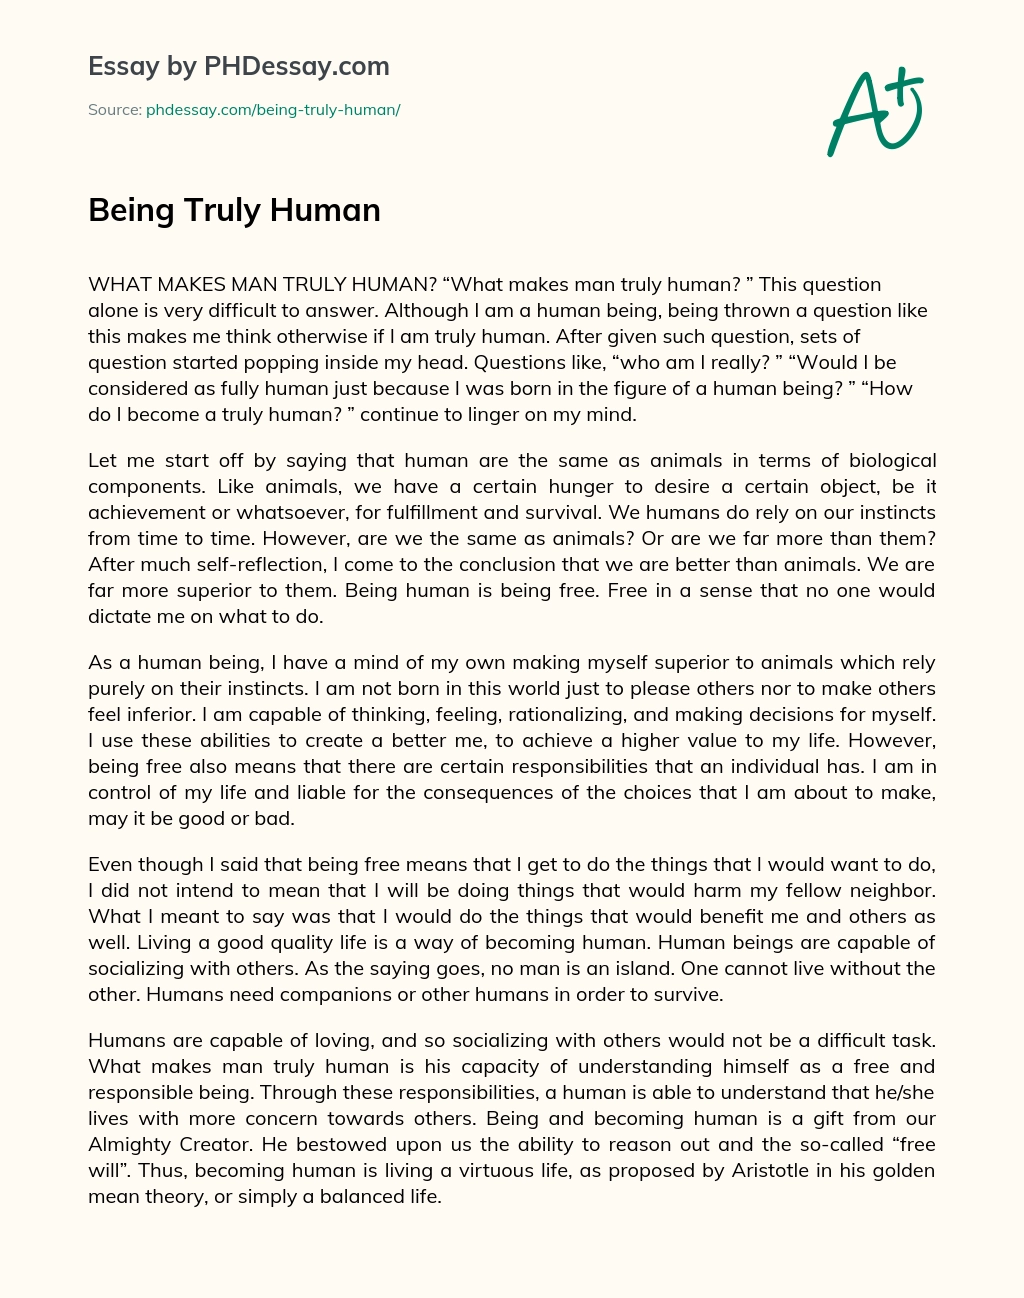 Being Truly Human essay